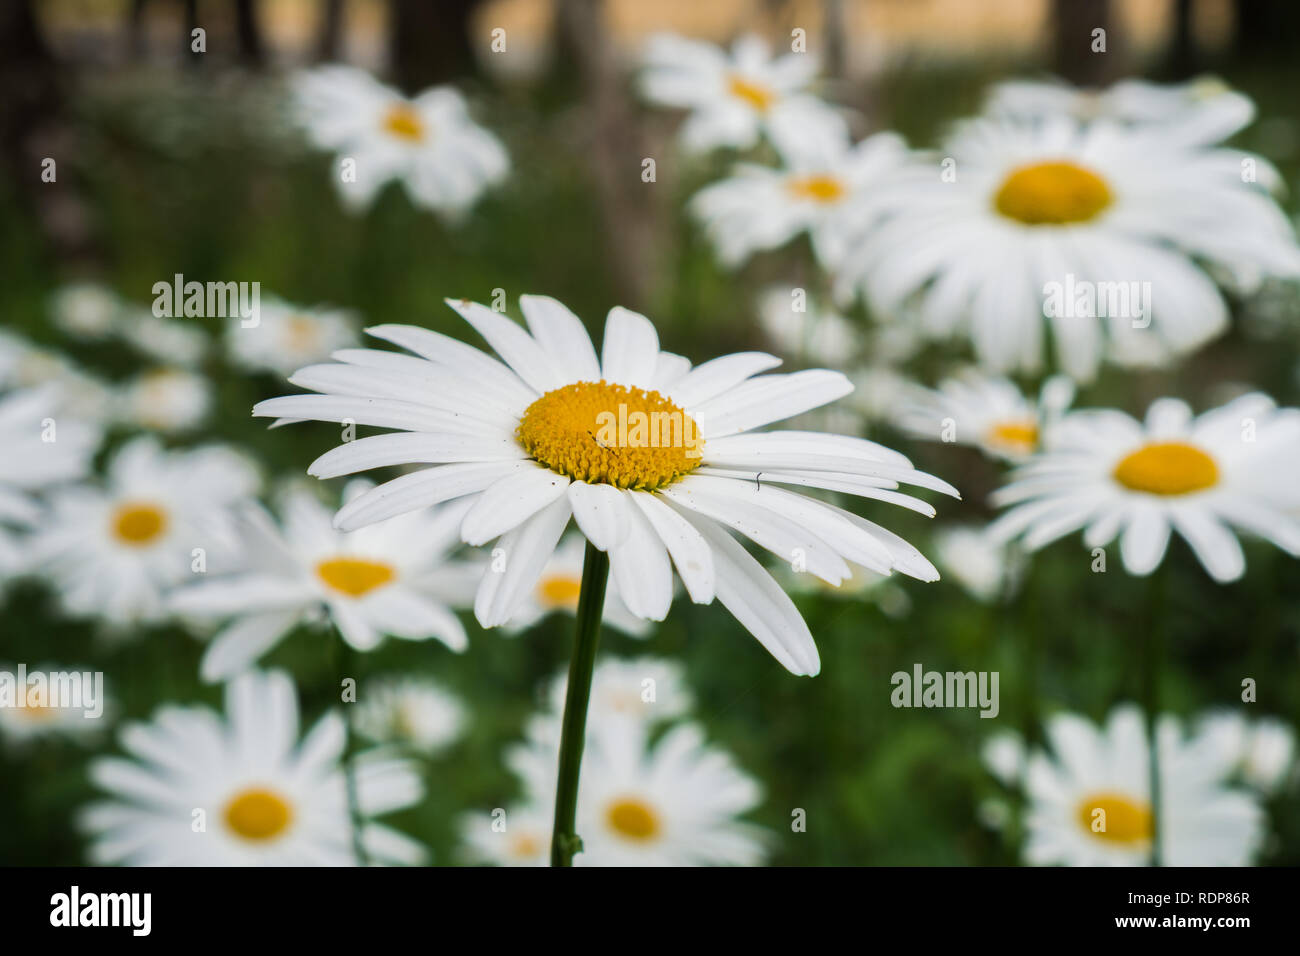 Daisy flowers blooming on a meadow Stock Photo